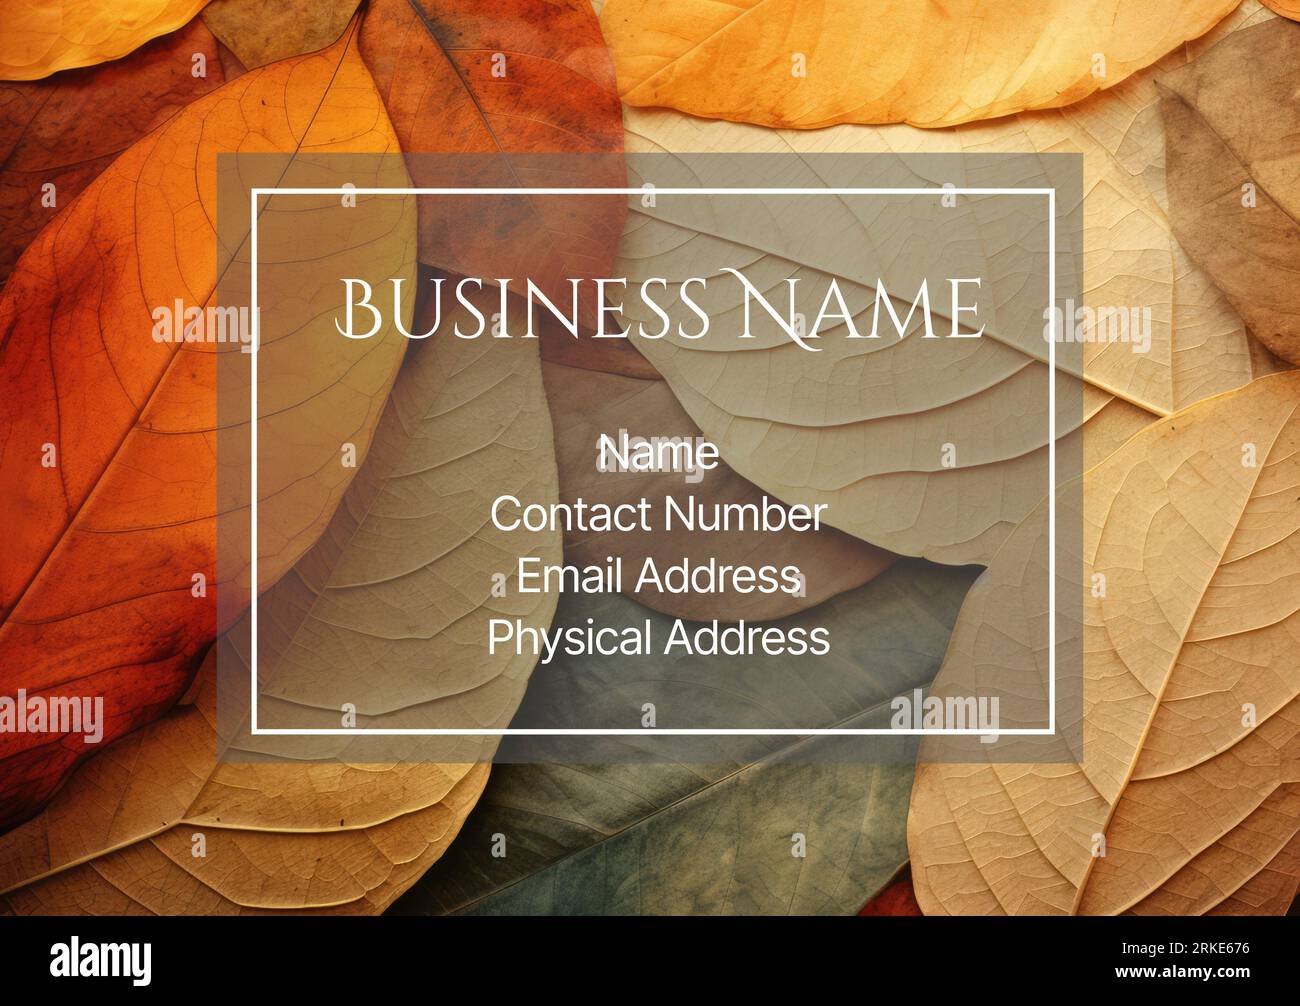 Composite of business name, name, contact number, email address, physical address over autumn leaves Stock Photo